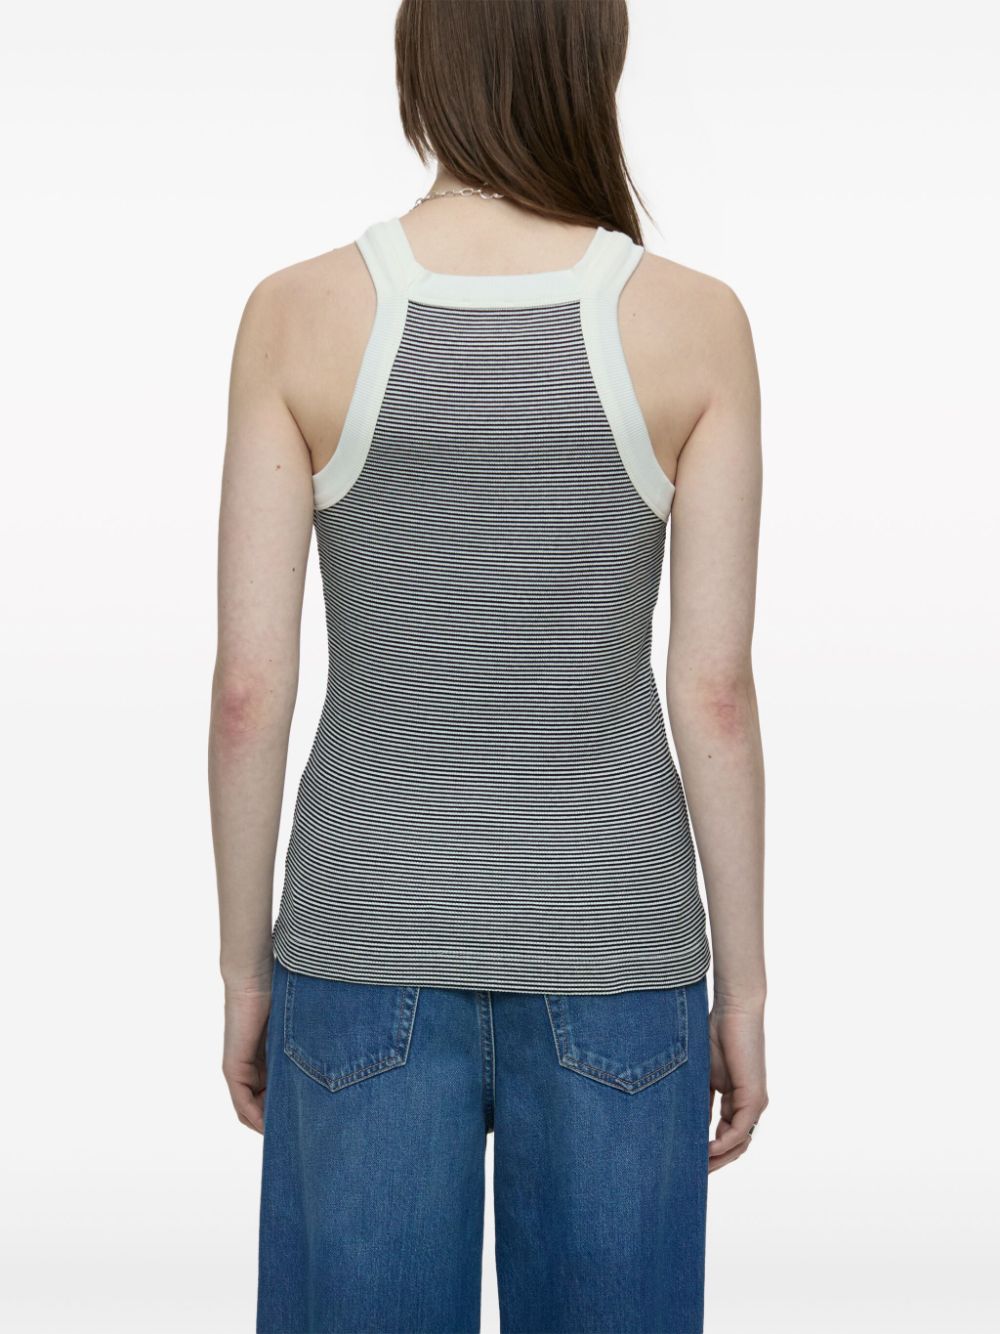 CLOSED CLOSED- Organic Cotton Cropped Tank Top